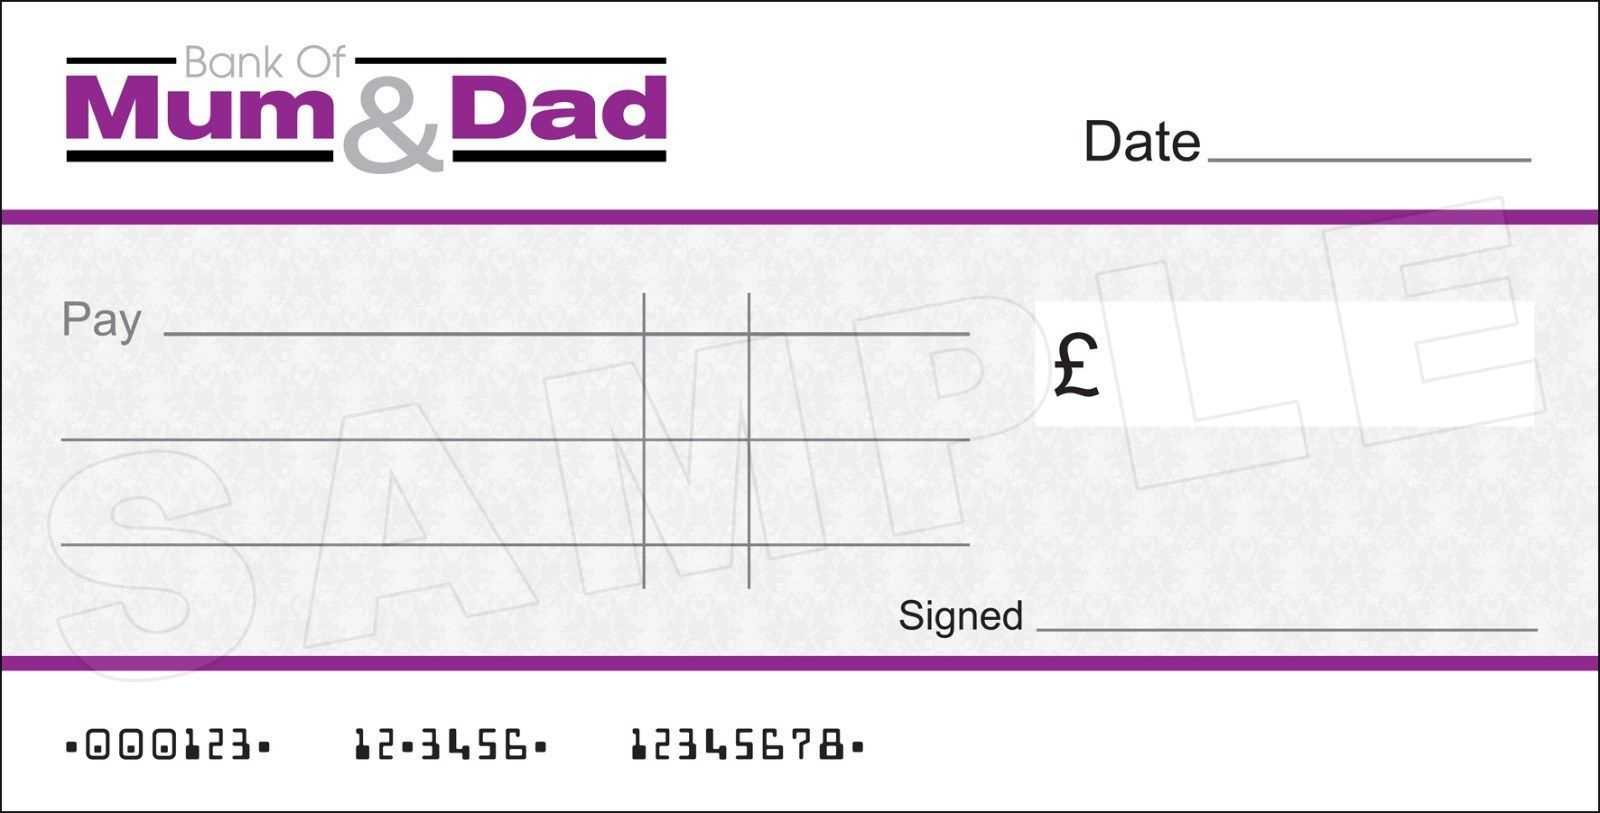 Details About Large Blank Bank Of Mum & Dad Cheque | Dads For Fun Blank Cheque Template